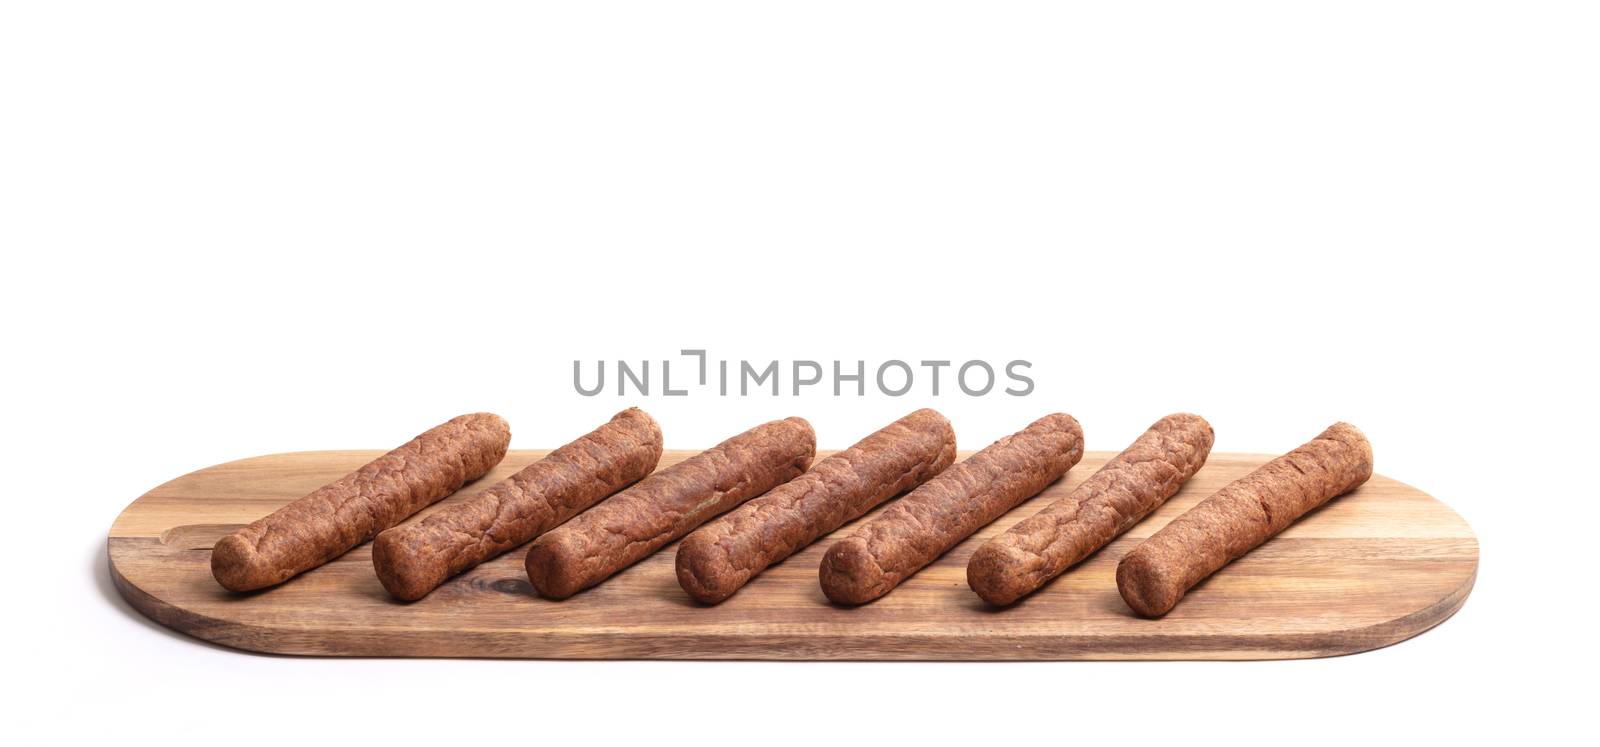 Wooden tray with frikadellen, a Dutch fast food snack by michaklootwijk